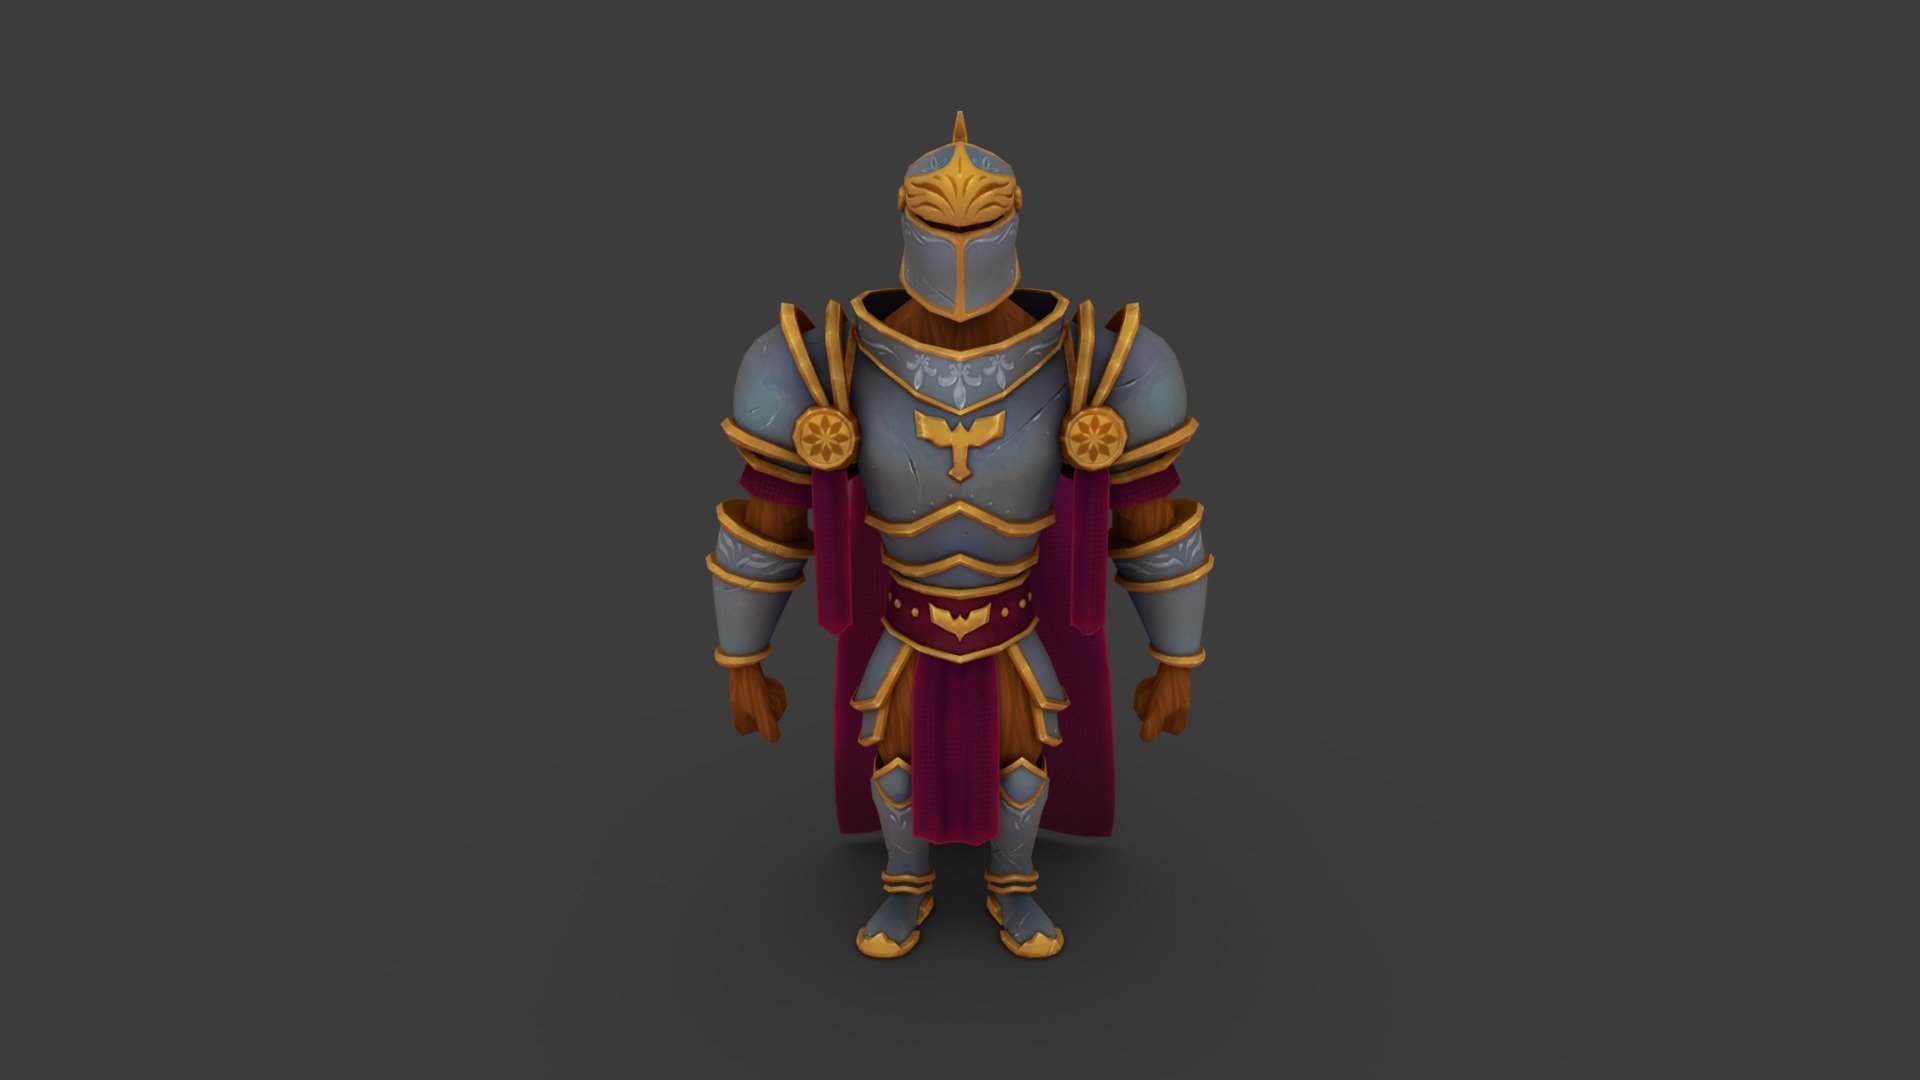 Medieval Armor modelled in 3Ds Max and textured in Substance Painter 3d model